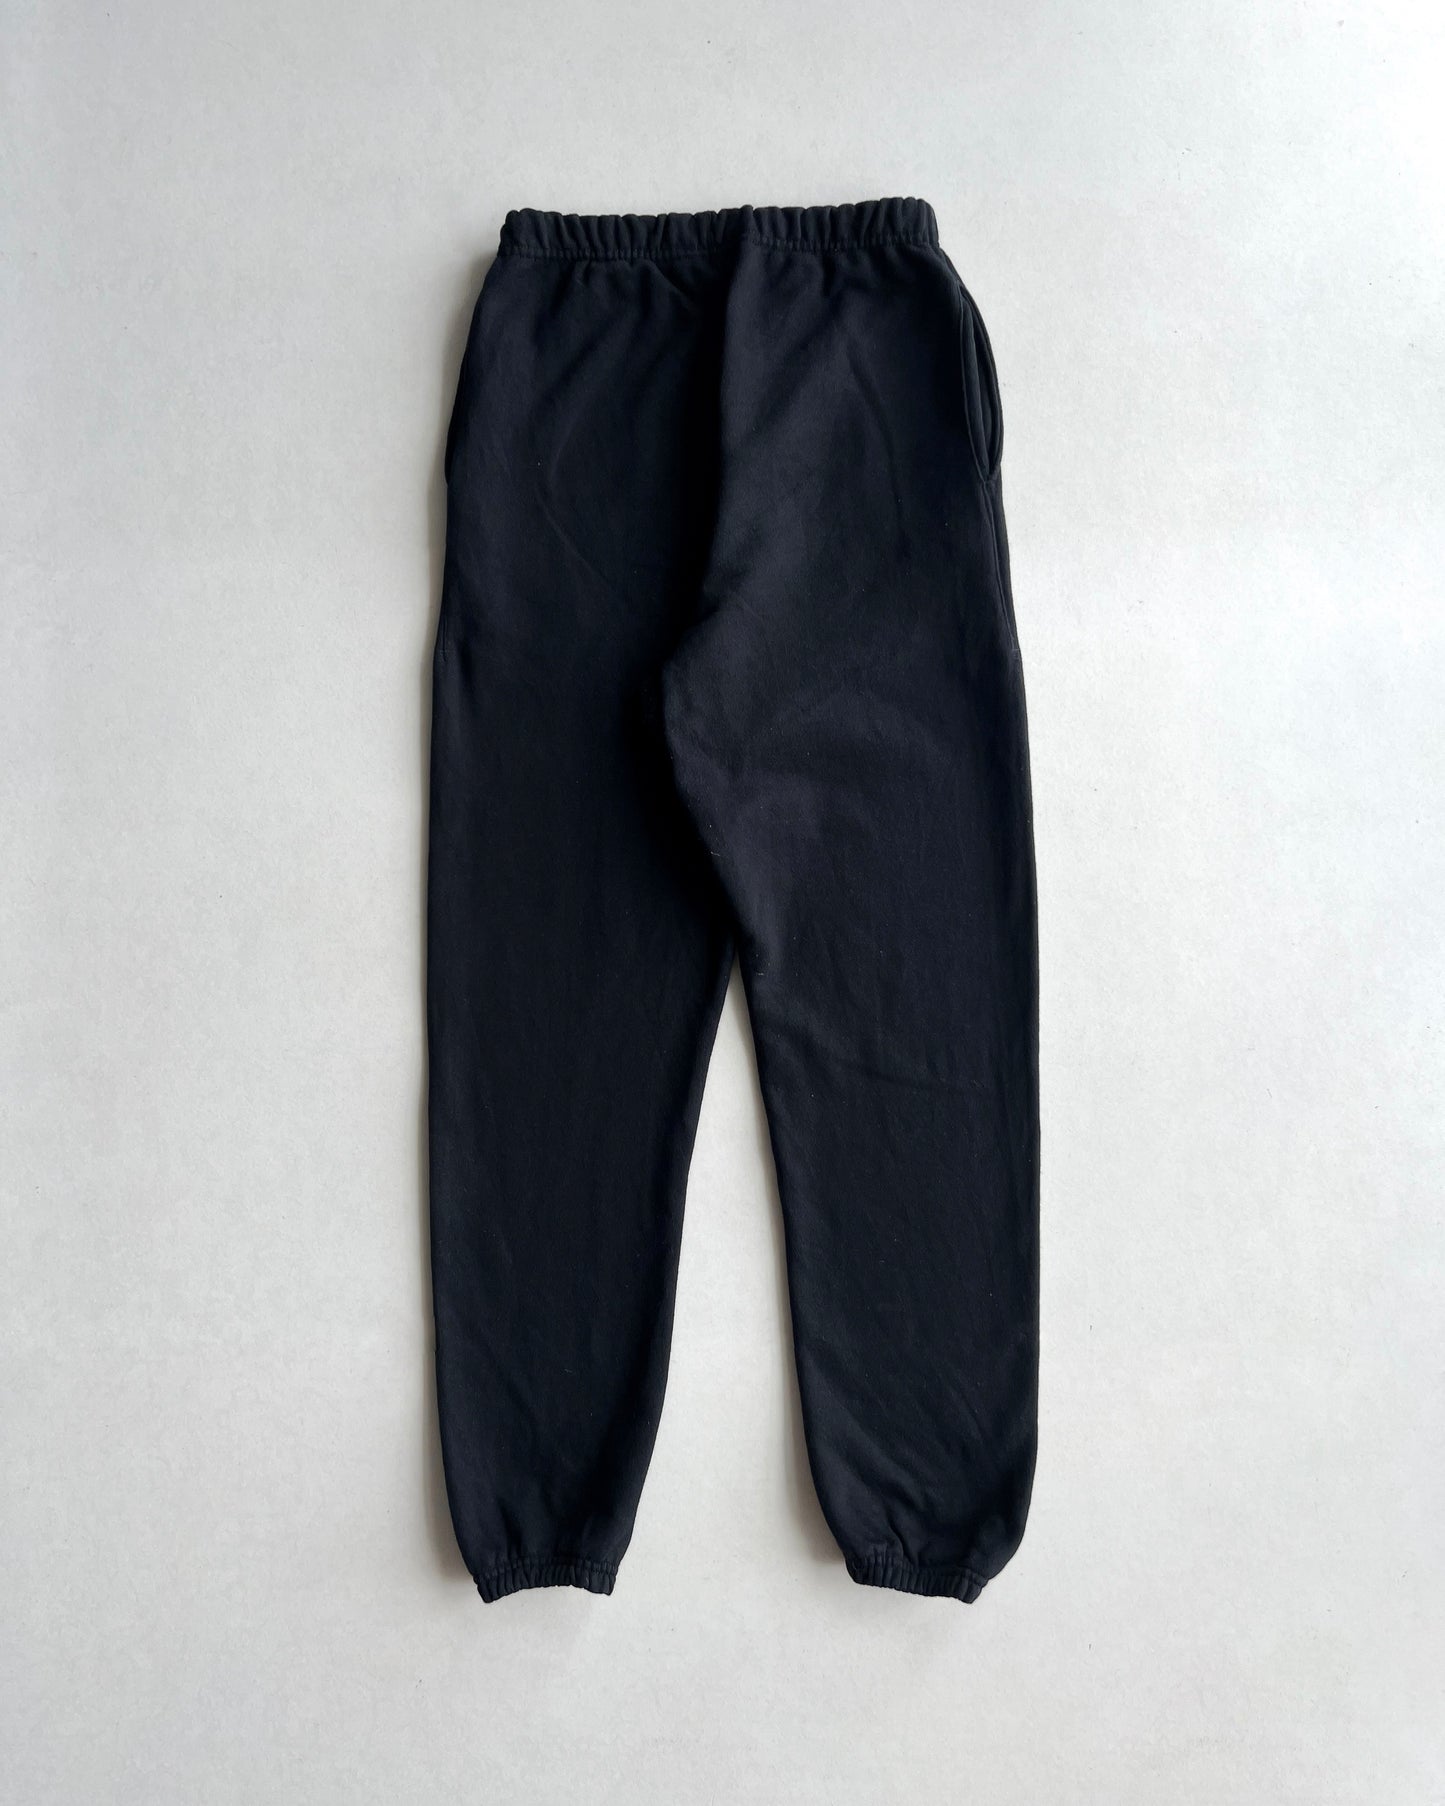 2000S CHAMPION 'STOP LOOKING AT MY DICK' SWEATPANTS (26-34)